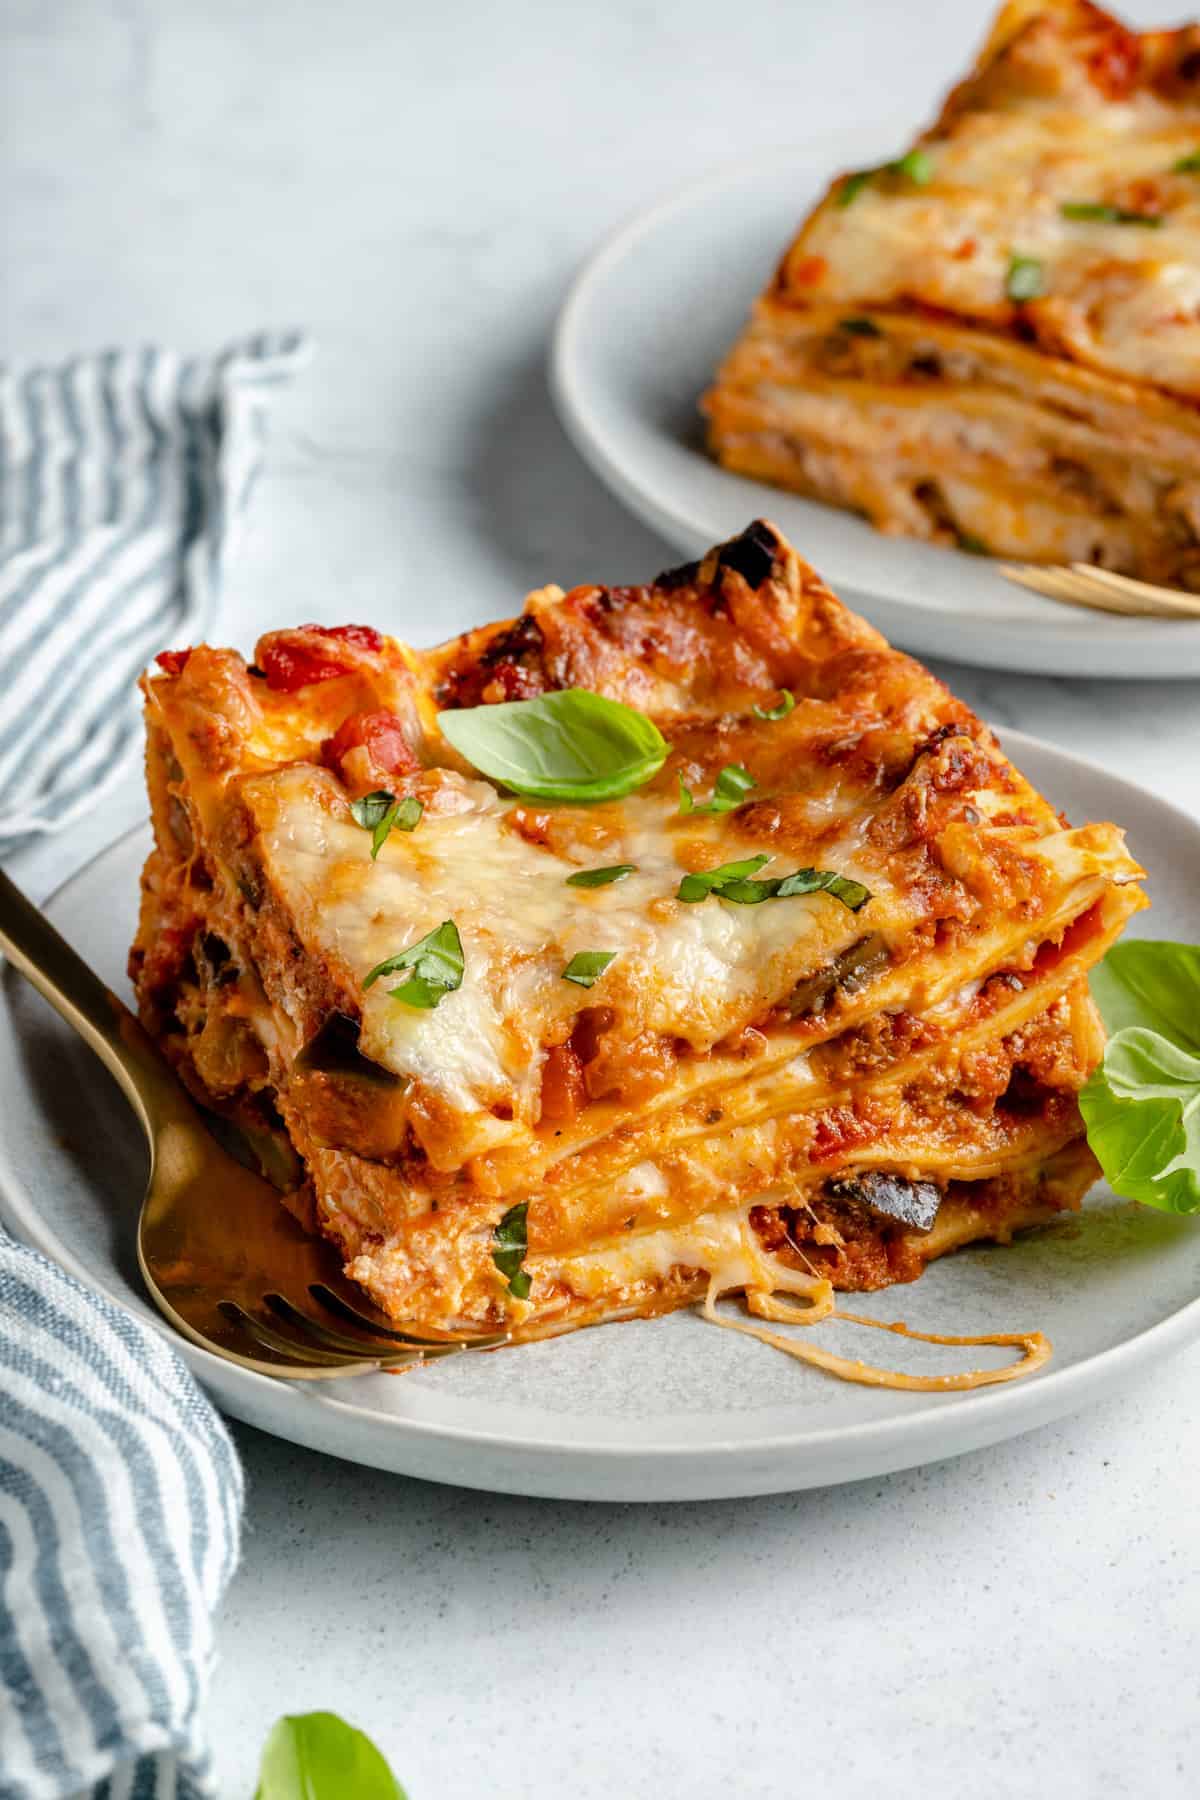 A plate of cheesy lasagna with basil.